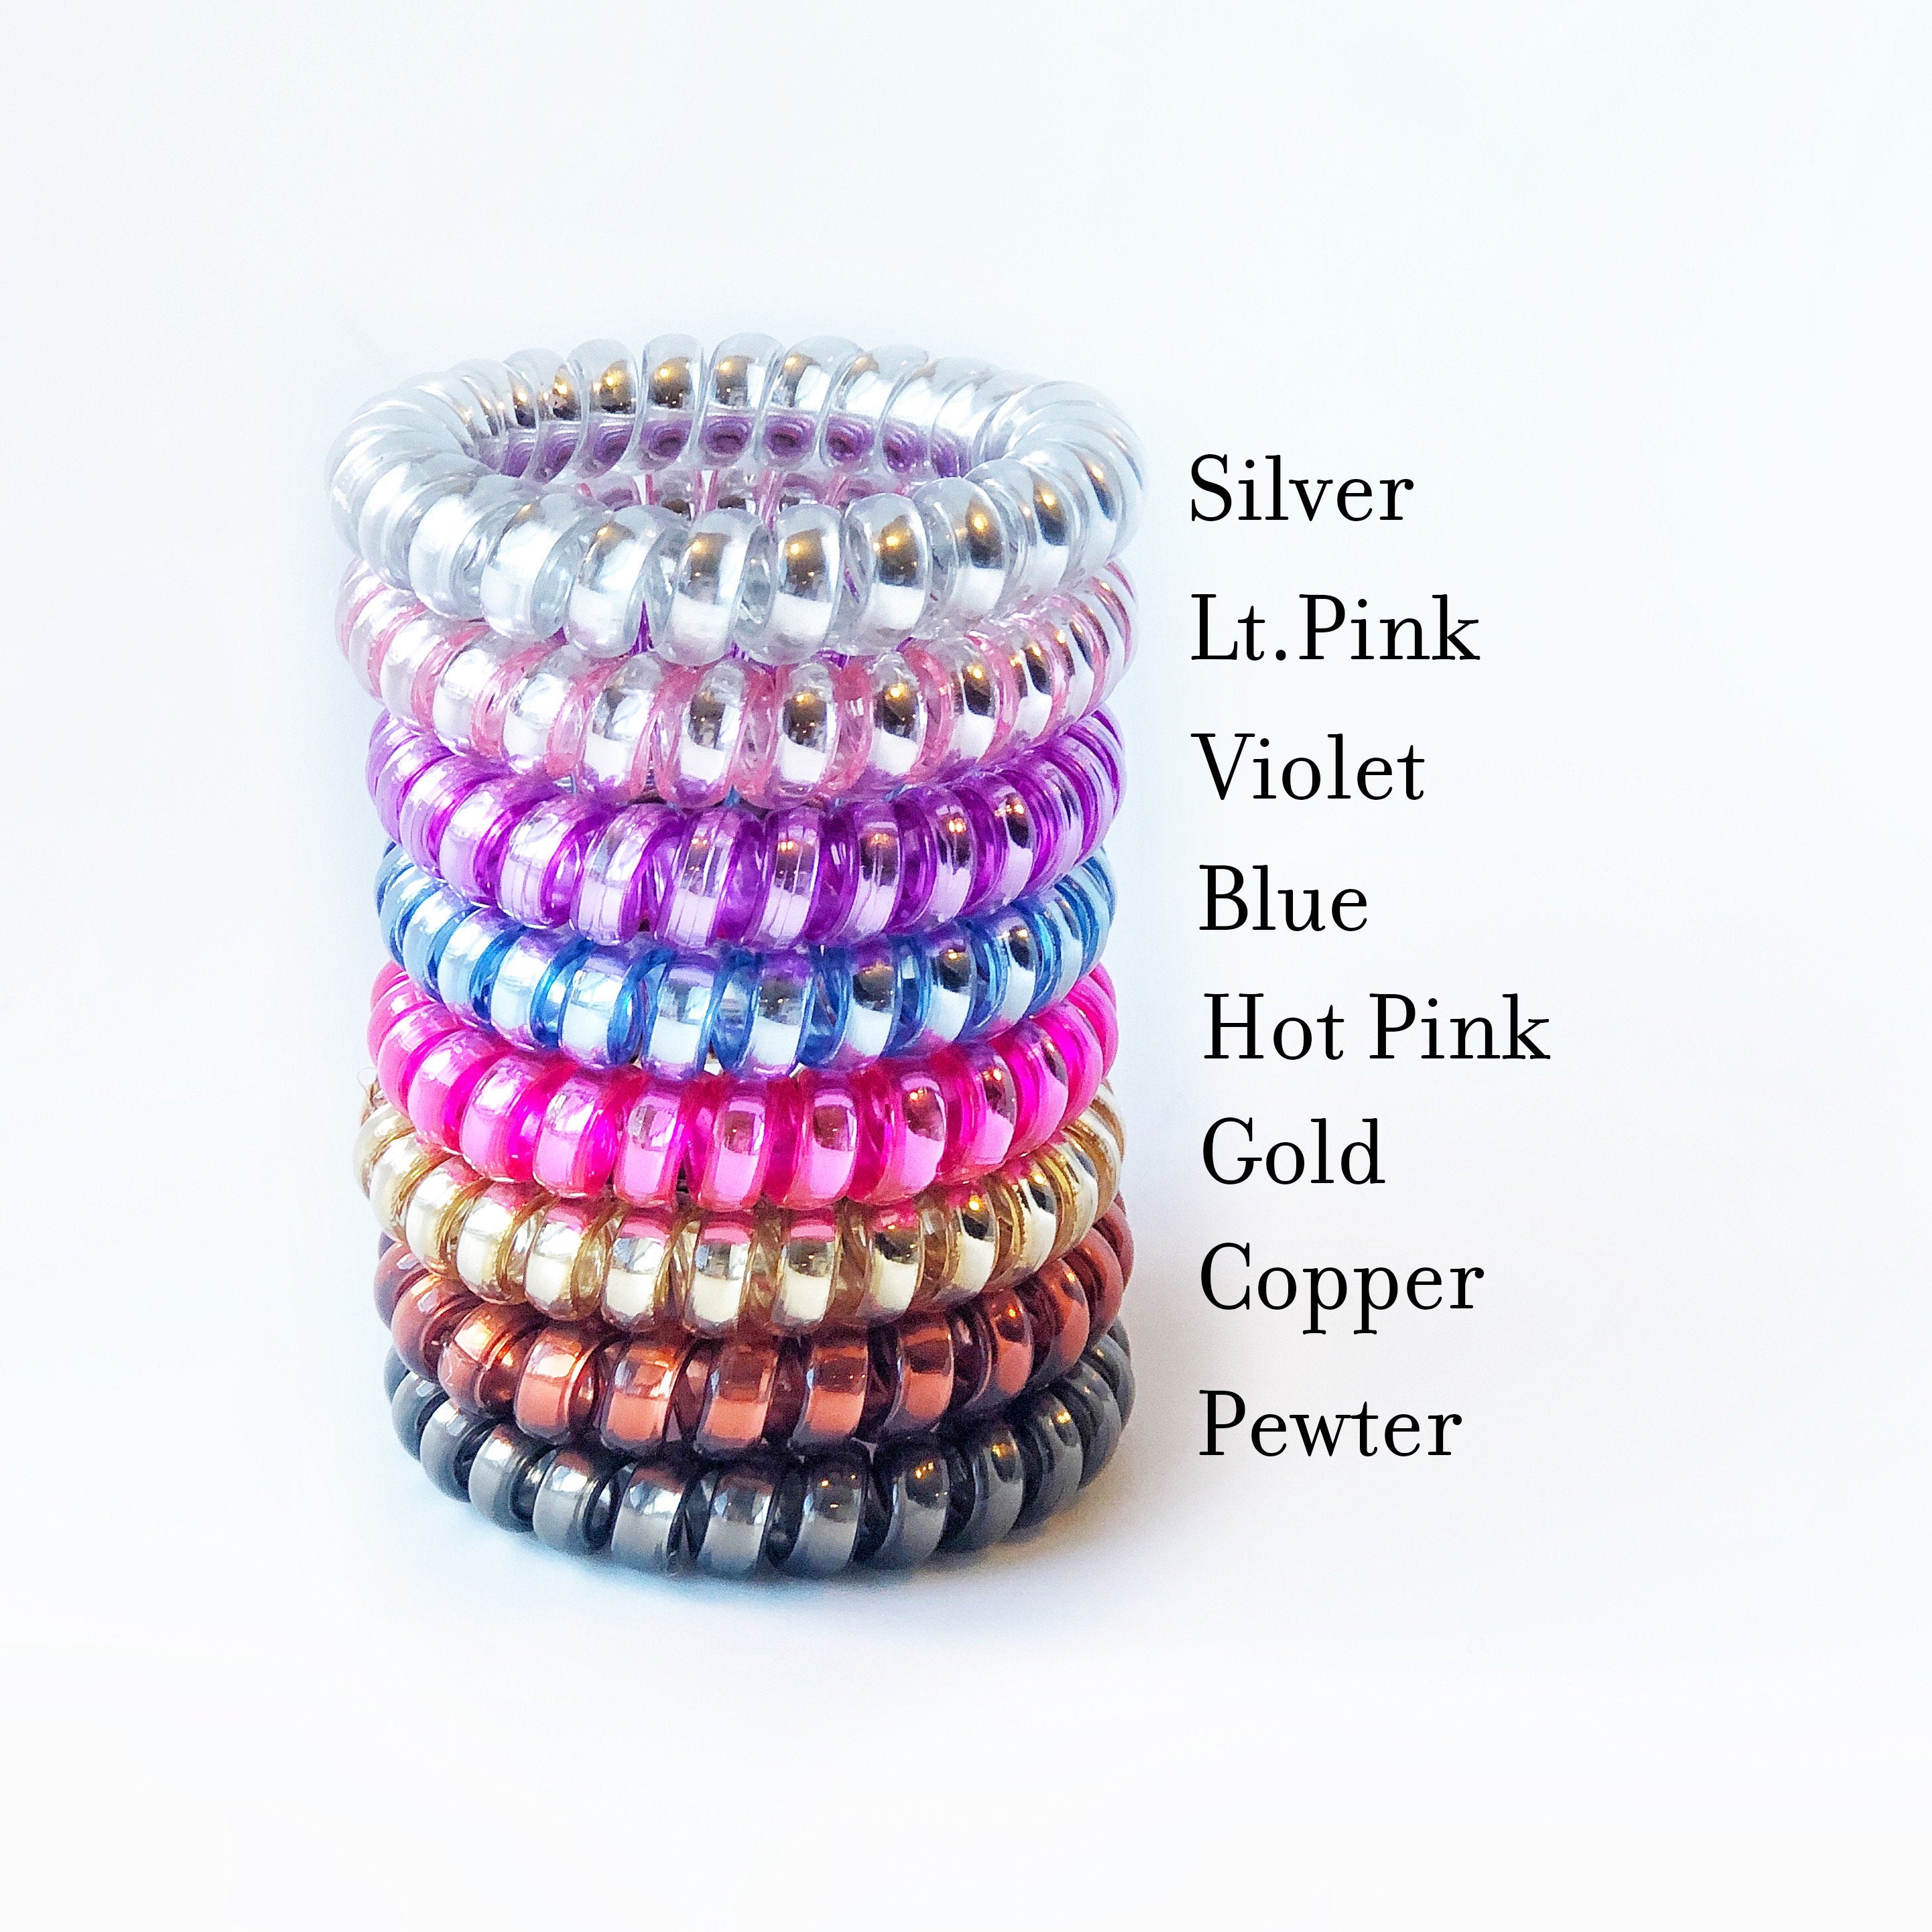 Spiral Hair Tie Baby Shower Favors Girl, It's a Girl Baby Shower Supplies, Baby Shower Party Favors, Telephone Cord Coil Hair Ties - @PlumPolkaDot 